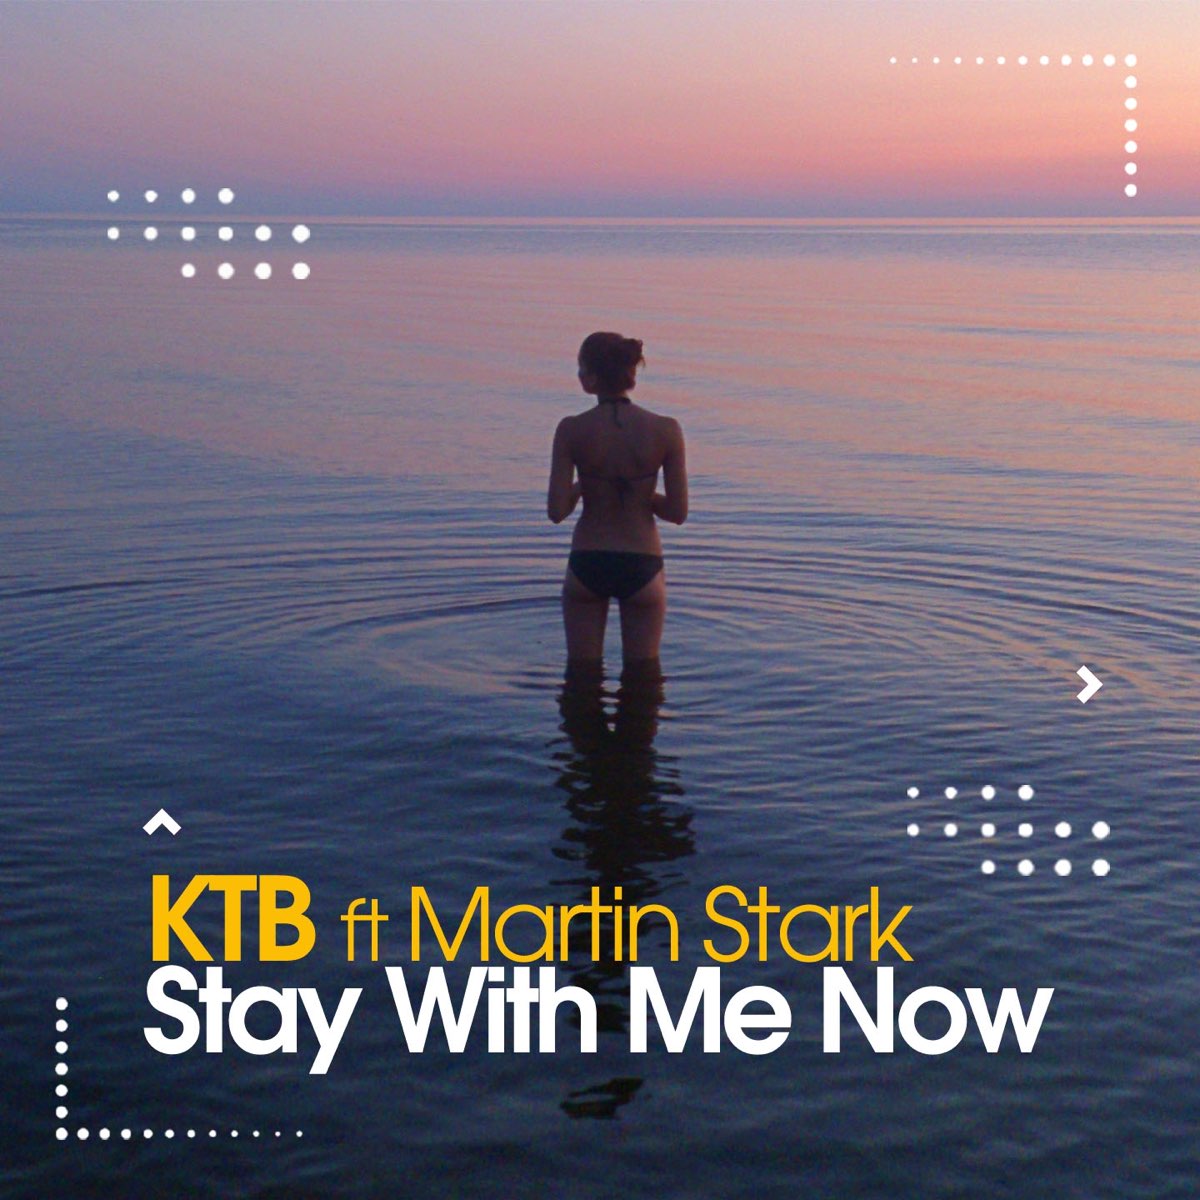 Stay with me now. Martin Stark. Remix картинки. Stay with me.